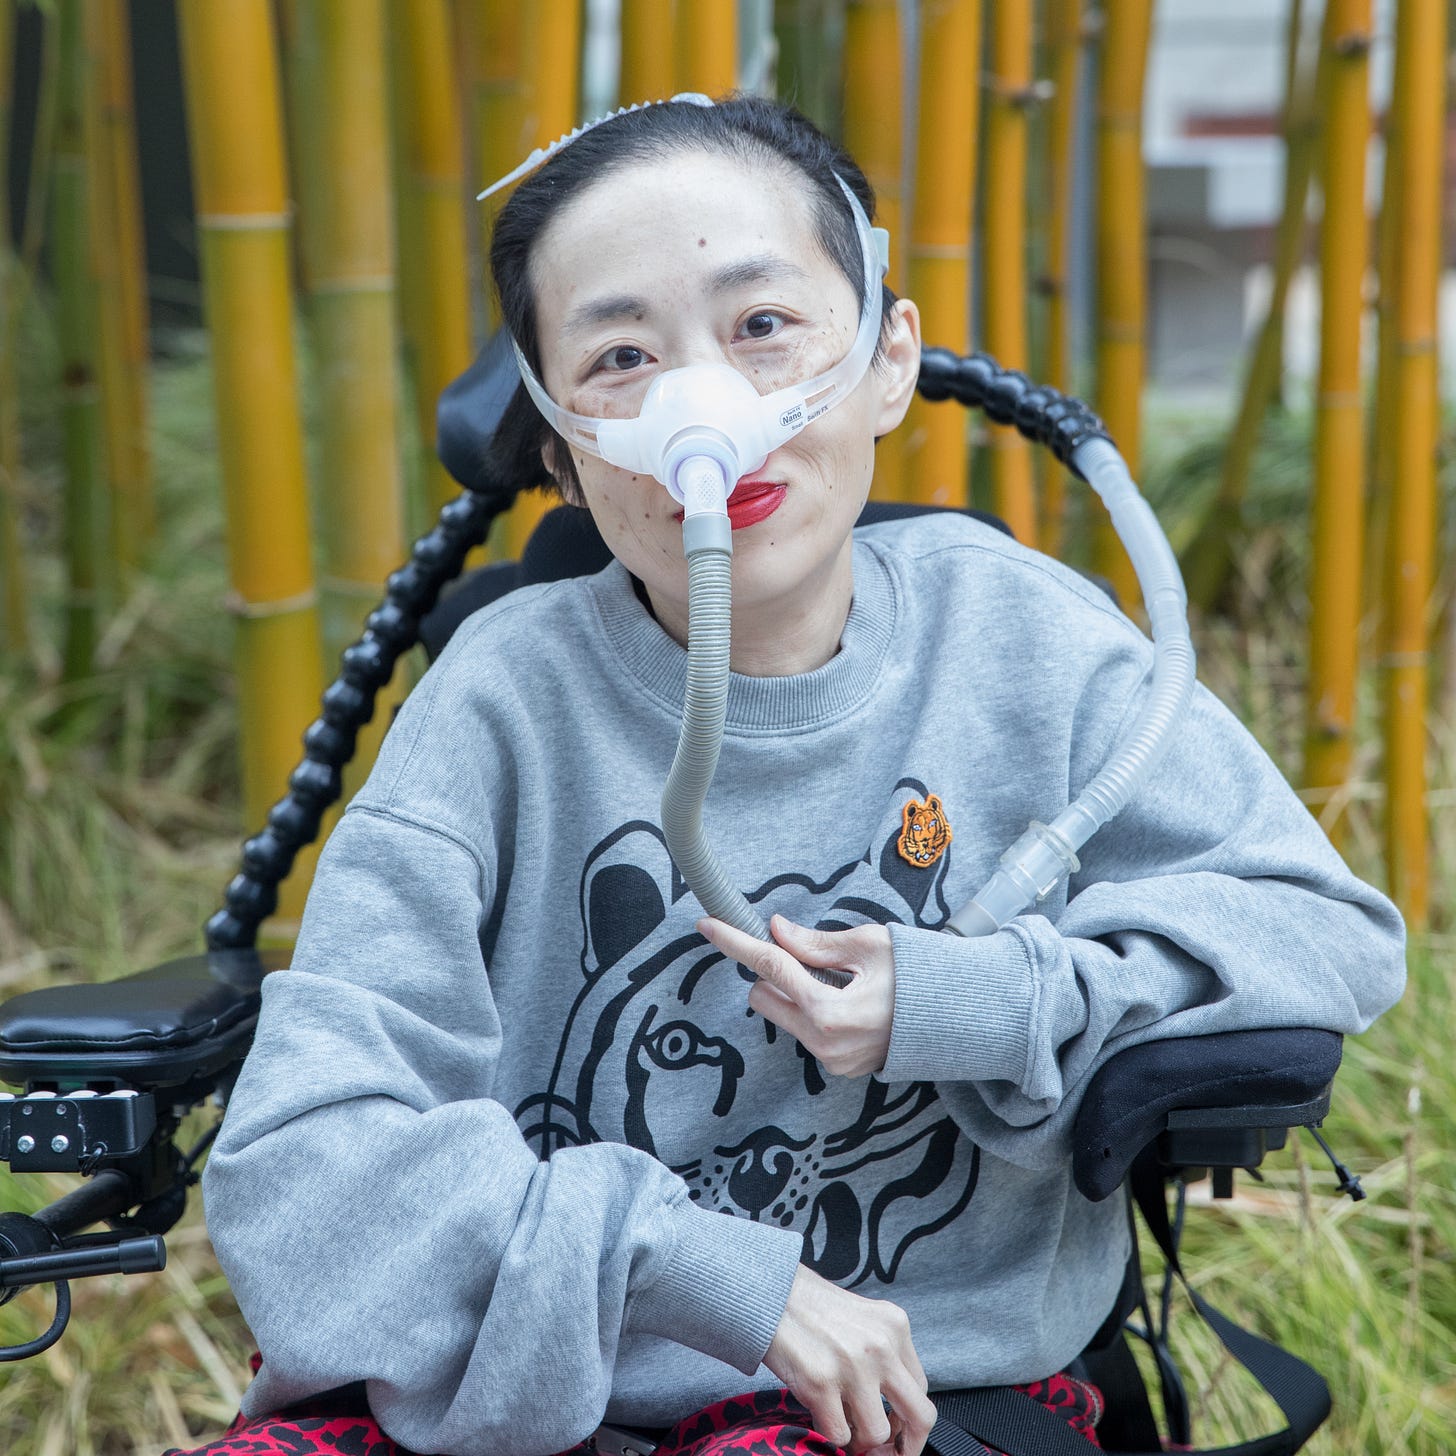 Photo of Alice Wong, an Asian American disabled woman with a mask over her nose attached to a tube for her ventilator. She is in a power wheelchair and wearing a gray sweatshirt with a tiger and leopard-print red and black pants. Behind her are bamboo trees. Credit: Eddie Hernandez Photography